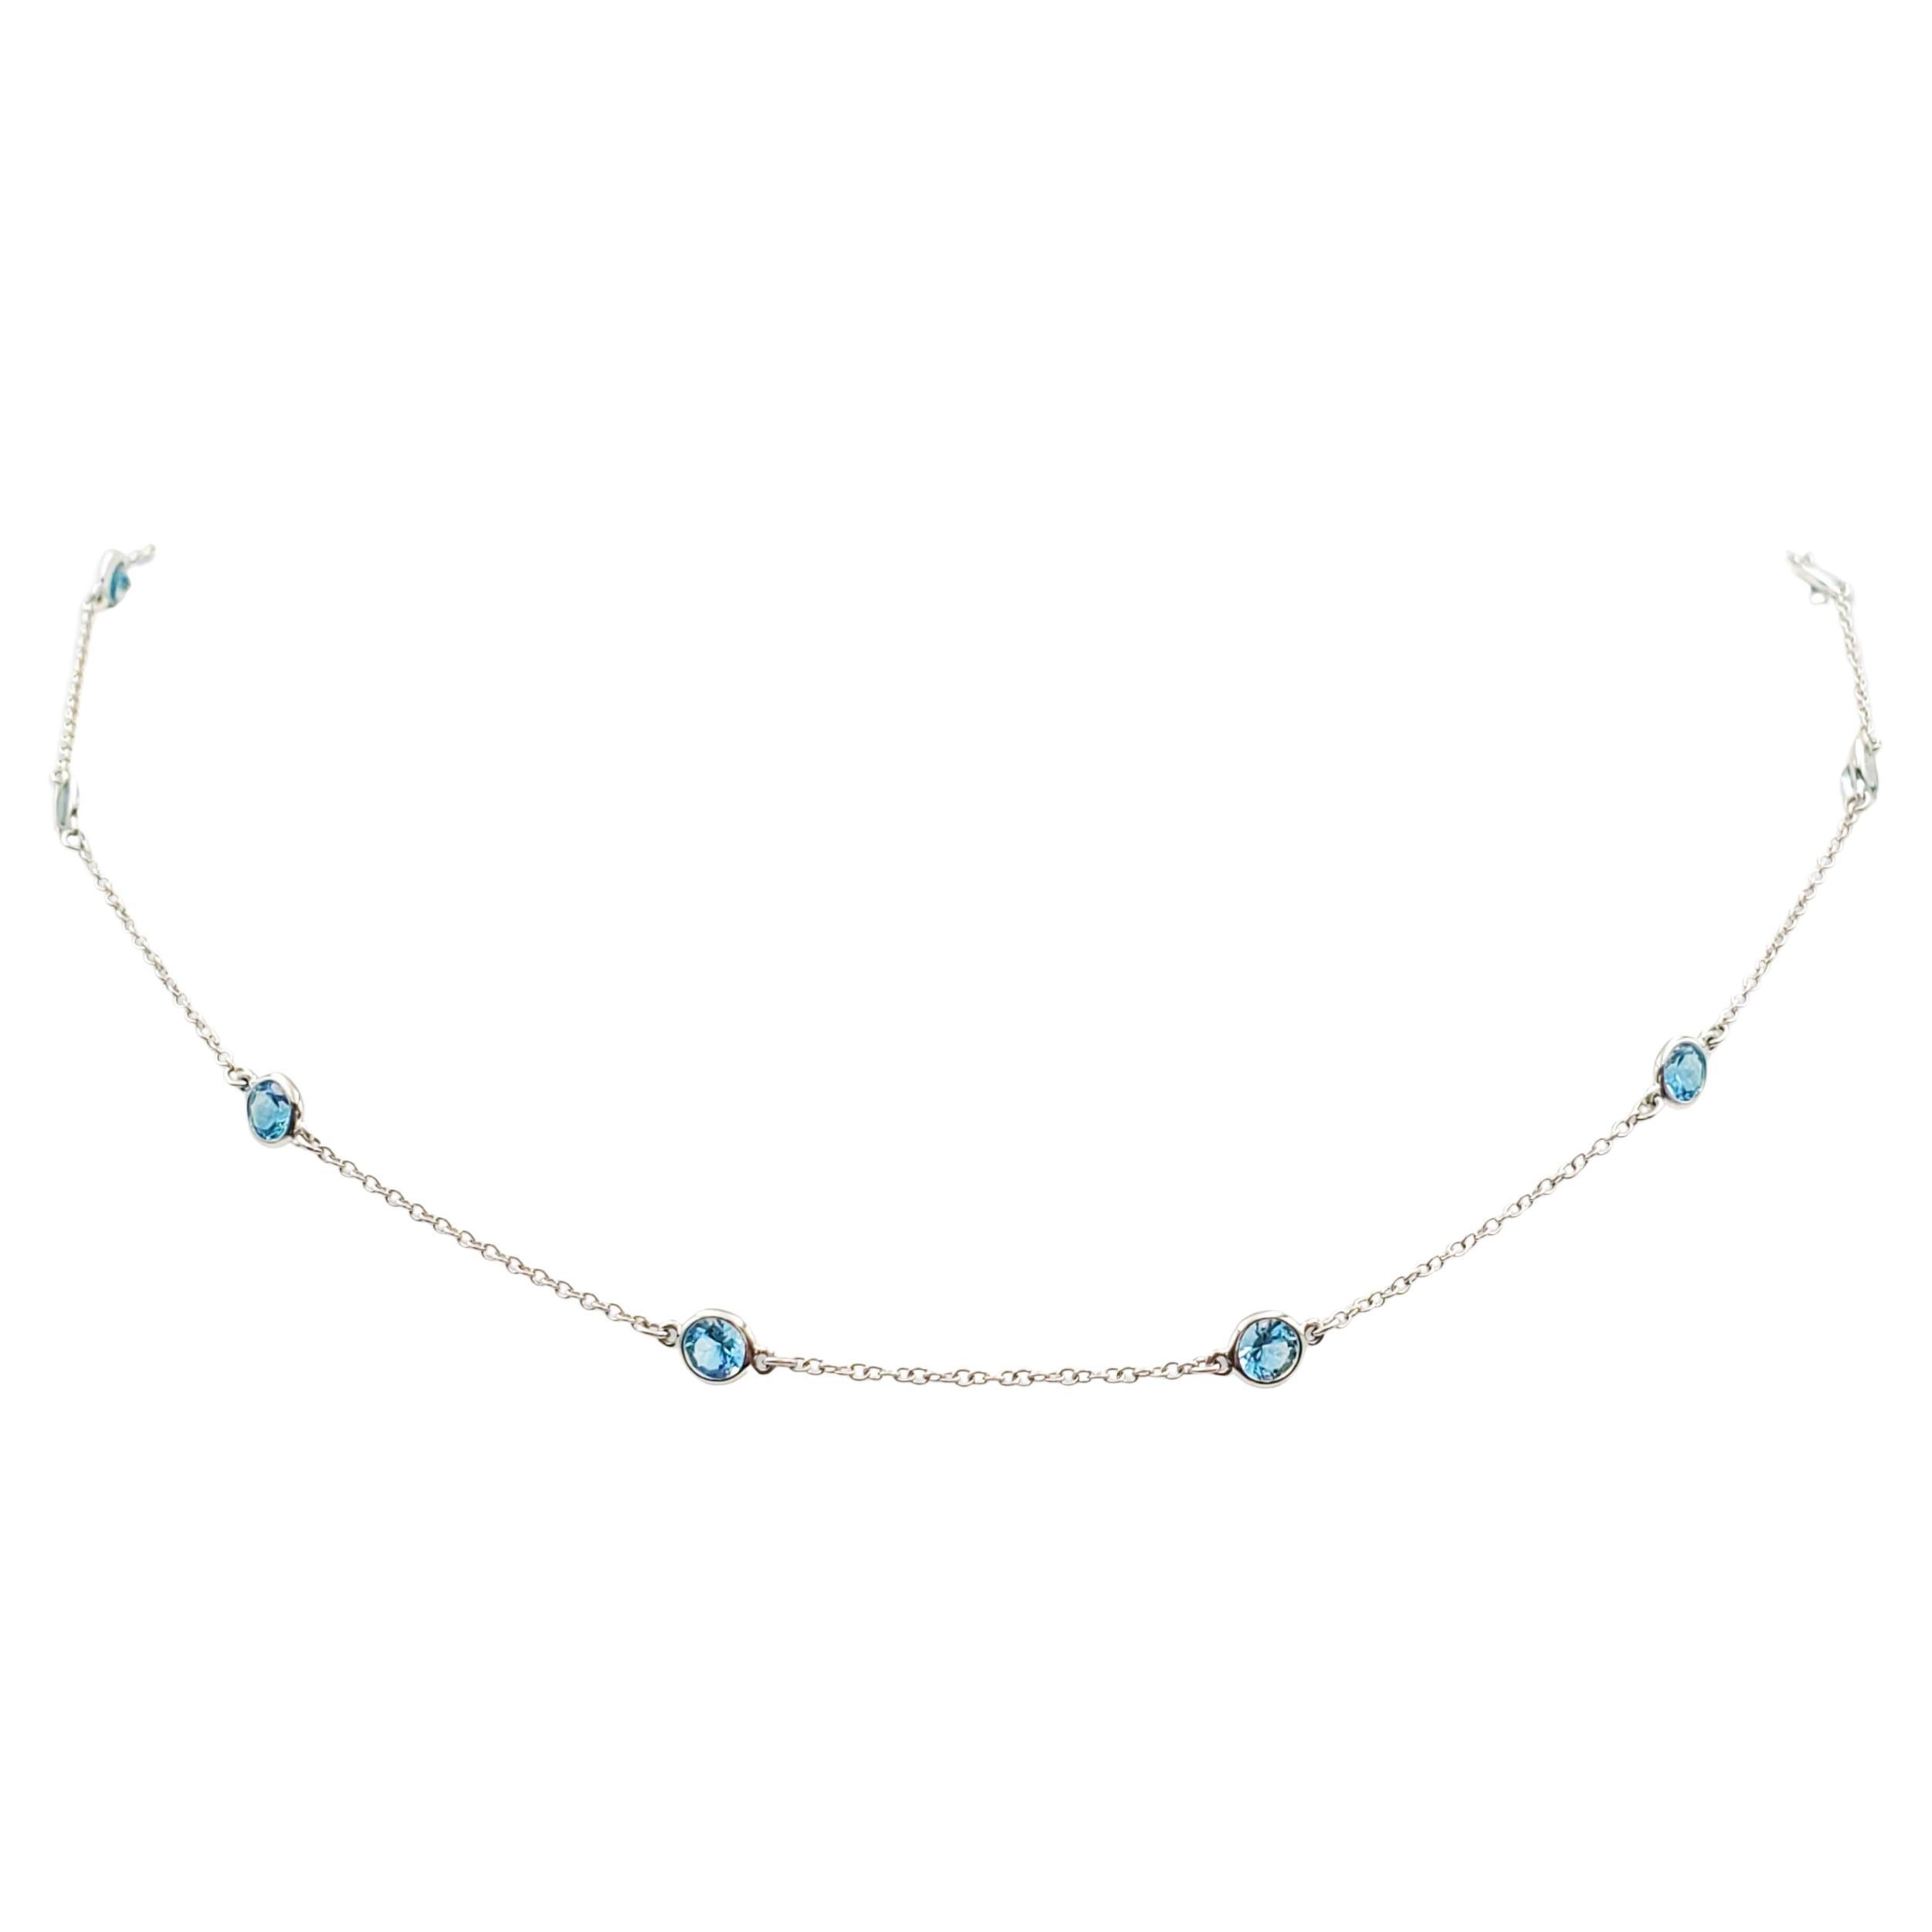 Tiffany & Co. Color by the Yard Aquamarine Pendant Necklace